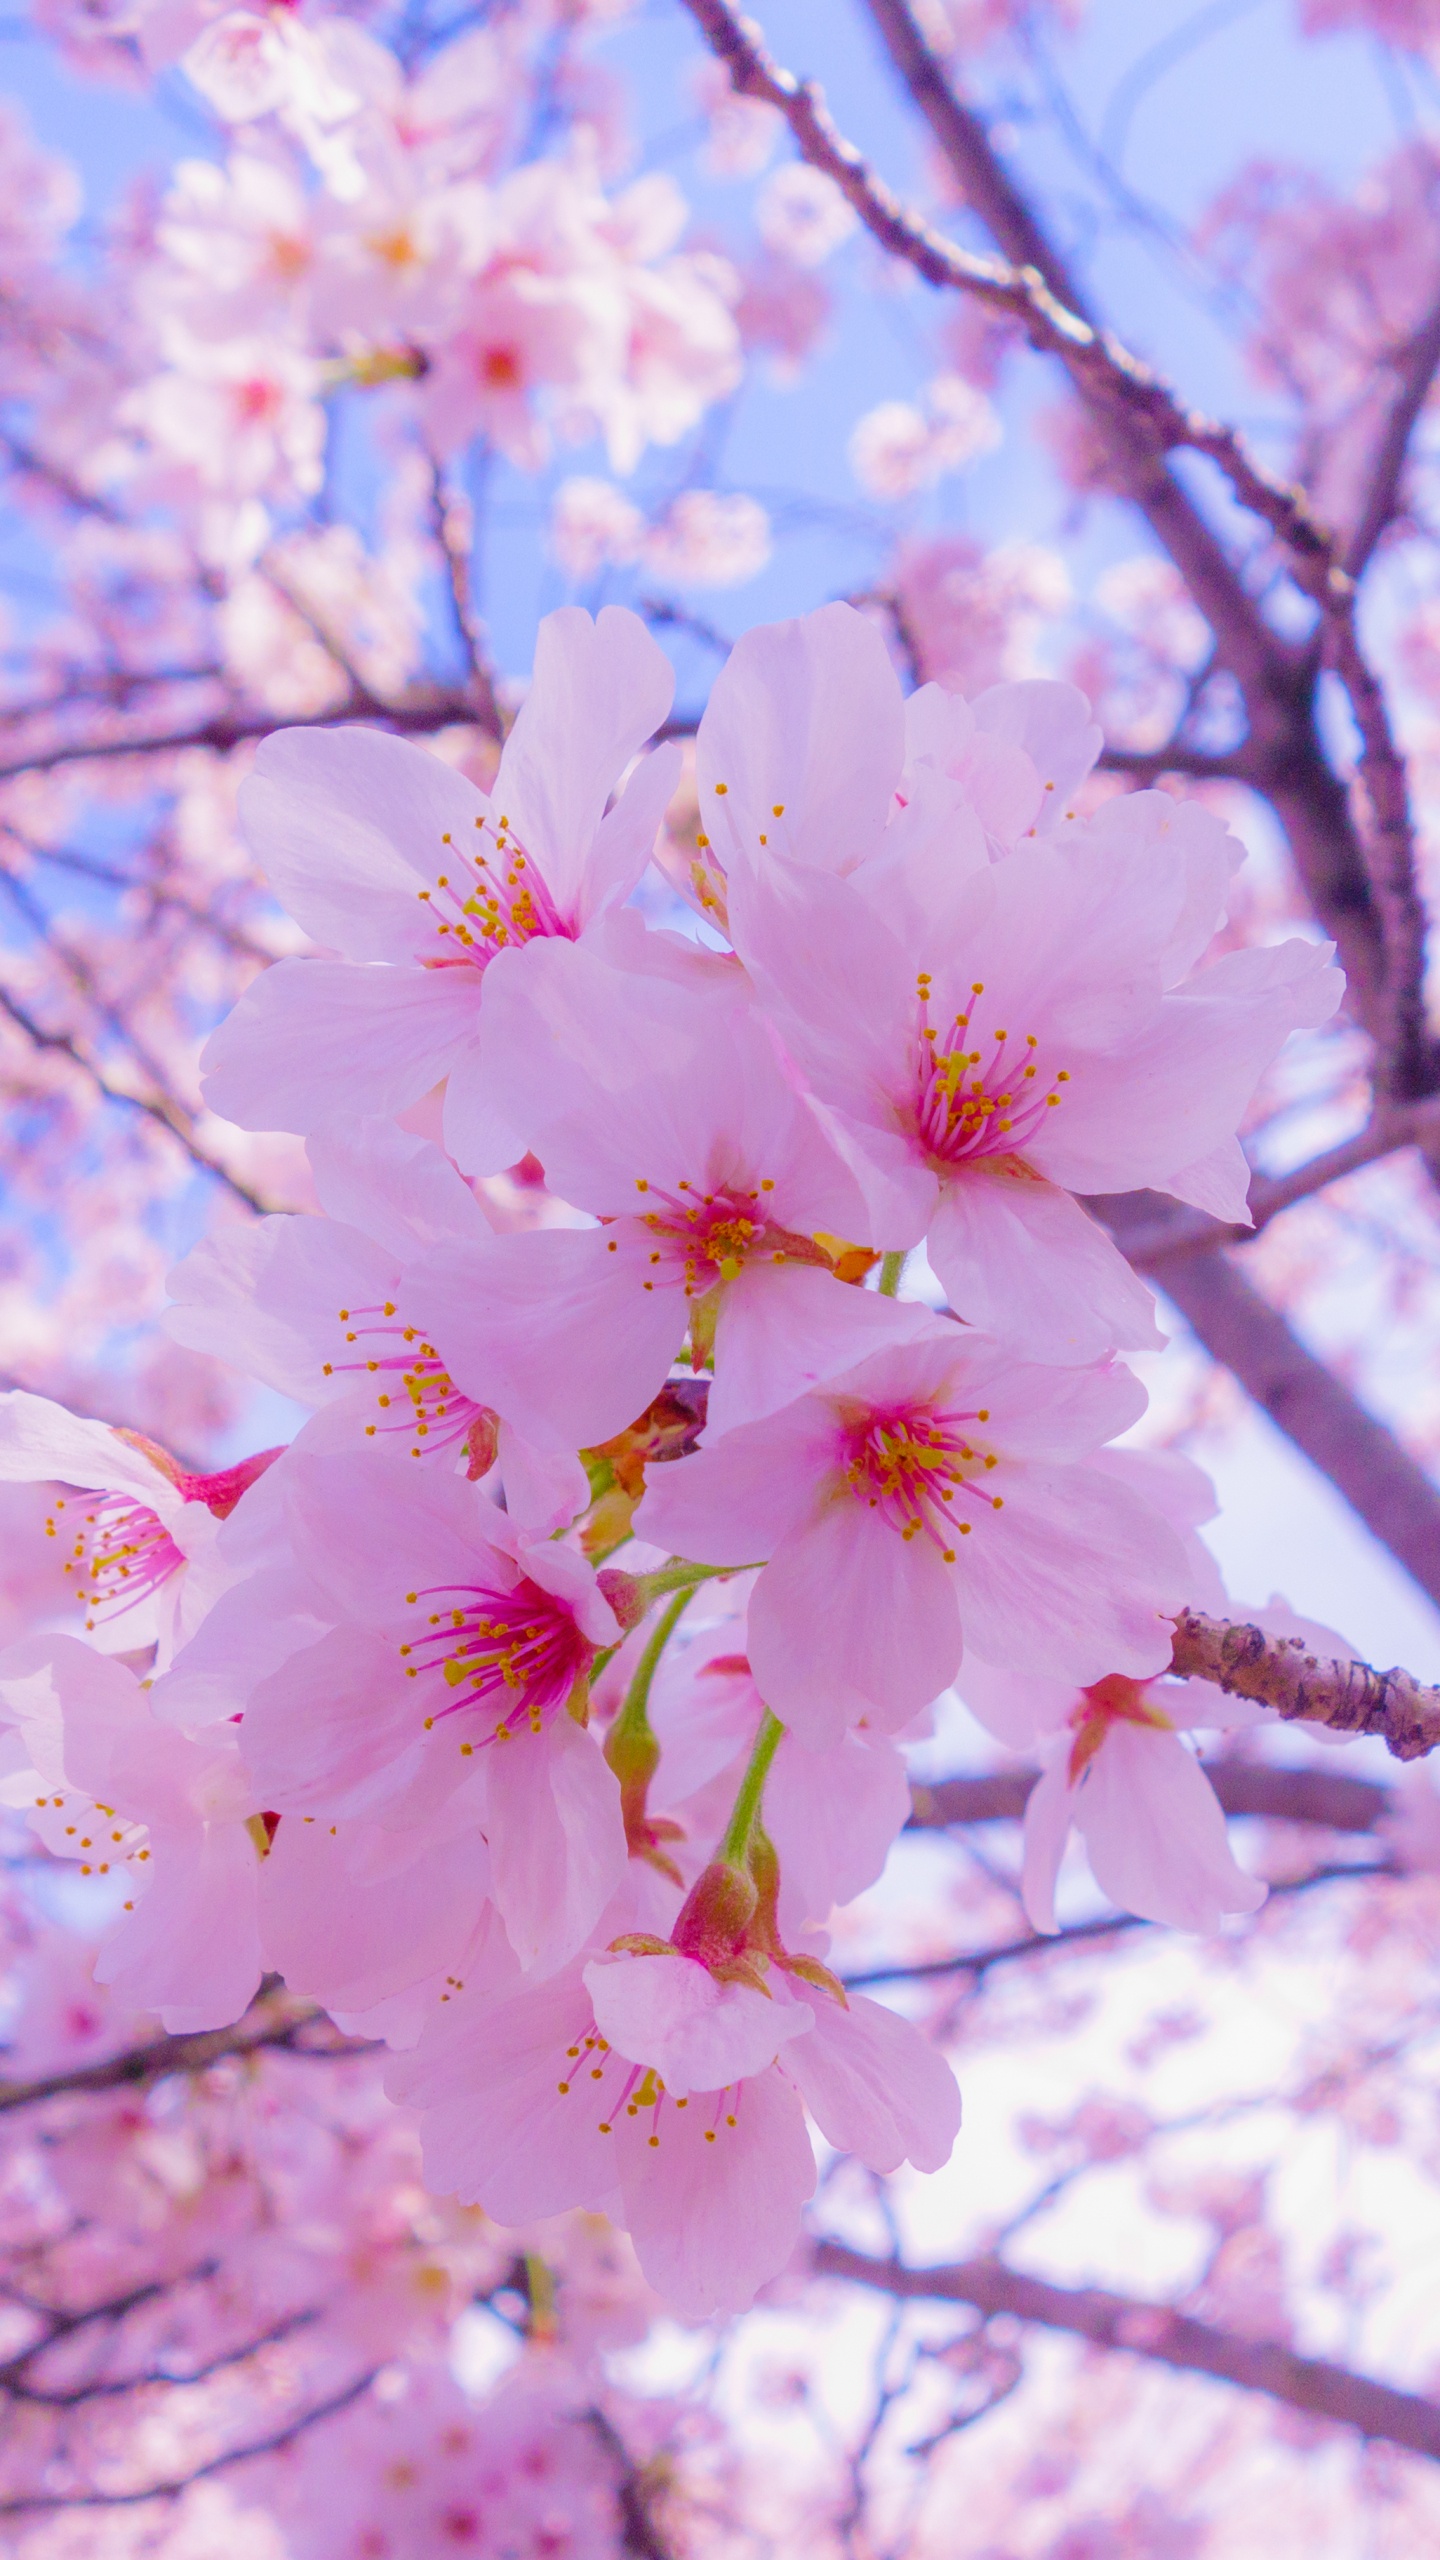 Pink Cherry Blossom Tree During Daytime. Wallpaper in 1440x2560 Resolution